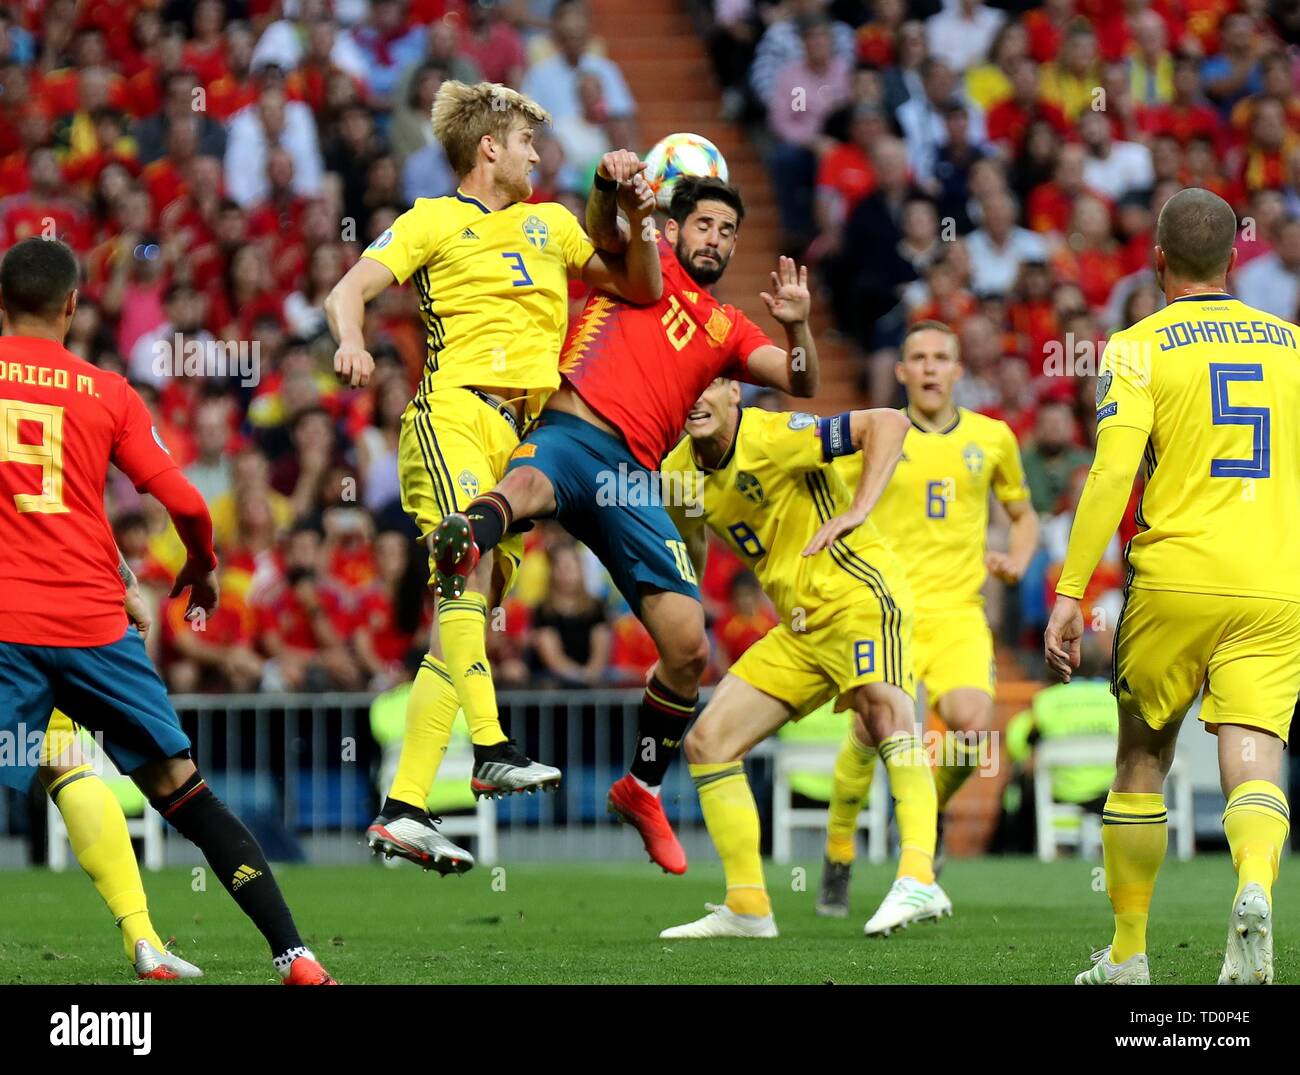 Madrid, Spain. 10th June, 2019. Spain's Isco (R, top) vies with Sweden's Filip Helander (L, top) during the UEFA Euro 2020 group F qualifying football match between Spain and Sweden in Madrid, Spain, on June 10, 2019. Spain won 3-0. Credit: Edward F. Peters/Xinhua/Alamy Live News Stock Photo